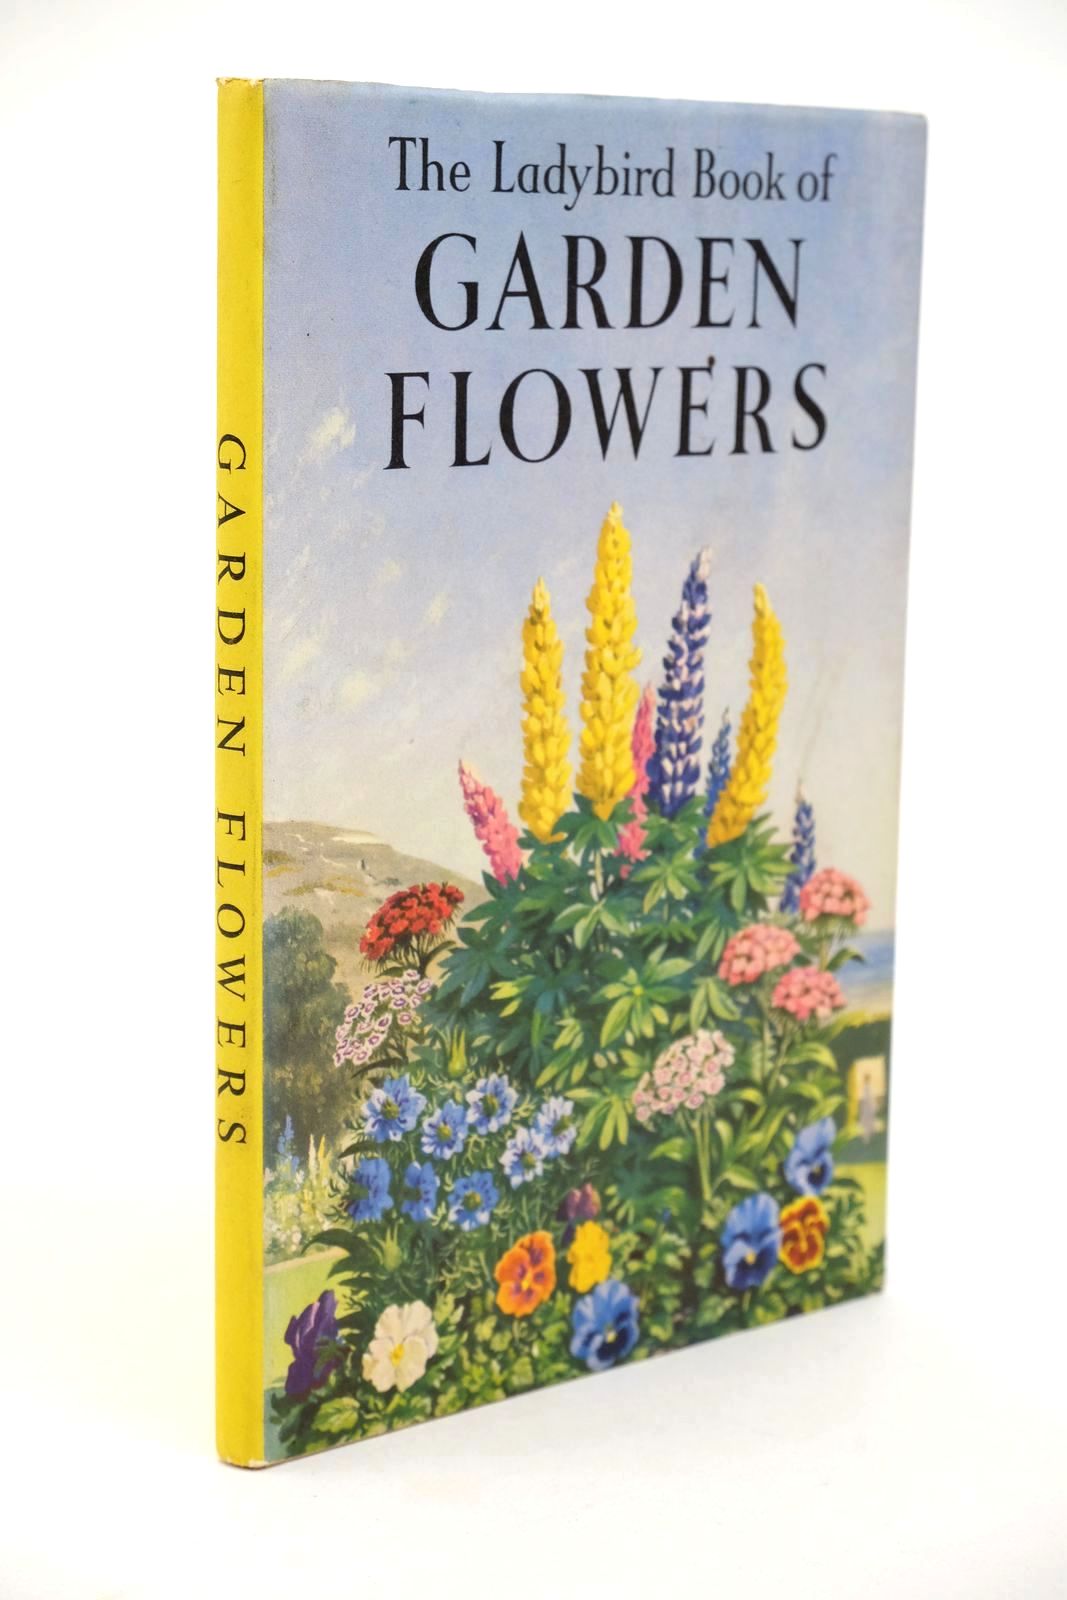 Photo of THE LADYBIRD BOOK OF GARDEN FLOWERS written by Vesey-Fitzgerald, Brian illustrated by Leigh-Pemberton, John published by Wills & Hepworth Ltd. (STOCK CODE: 1323137)  for sale by Stella & Rose's Books